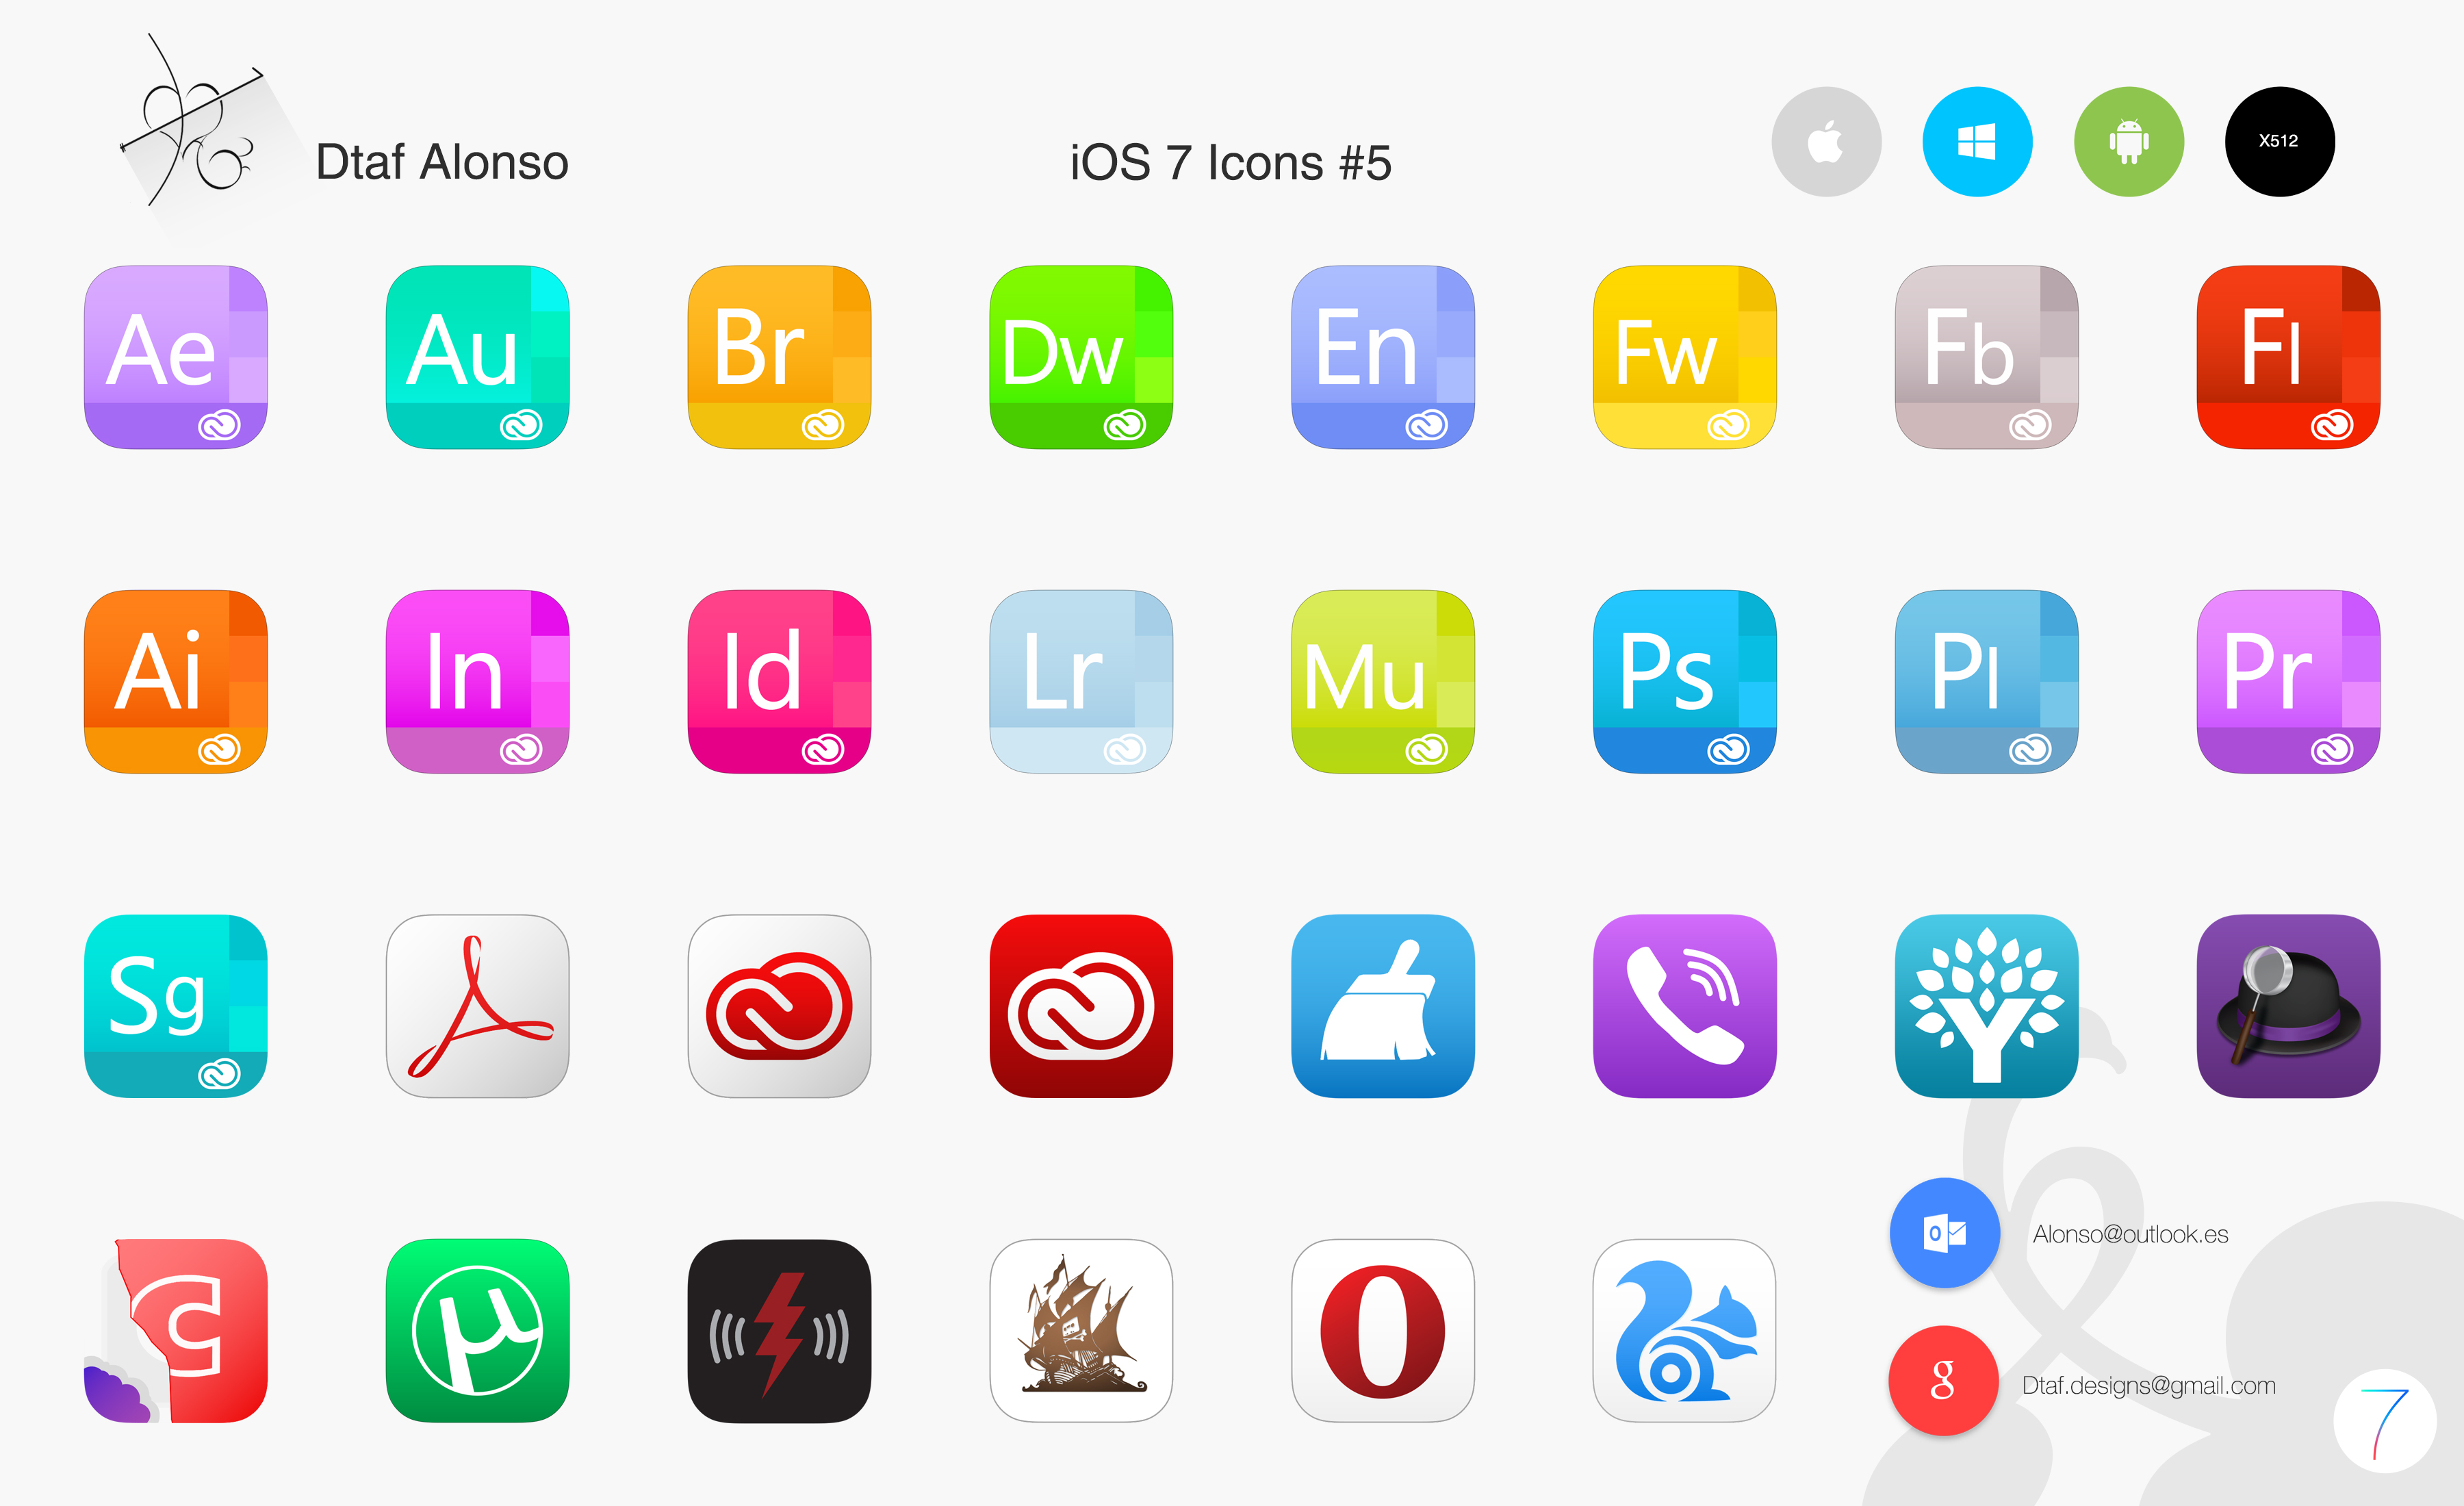 Give your iPhone an iOS 7 makeover with this new theme